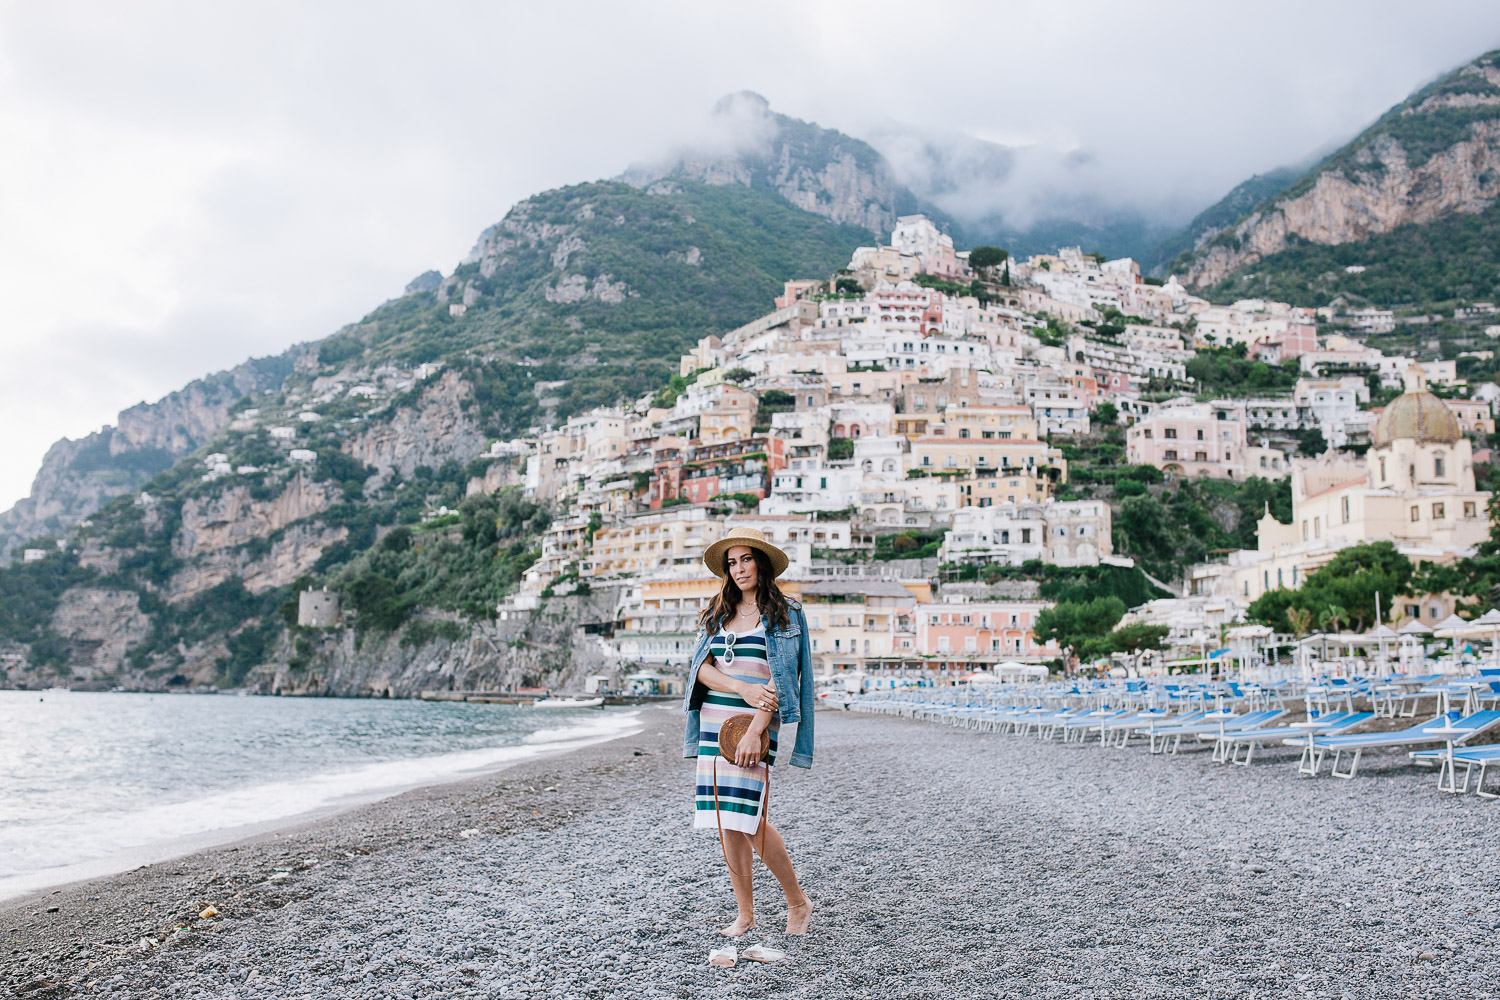 The Best Things to Do in Positano